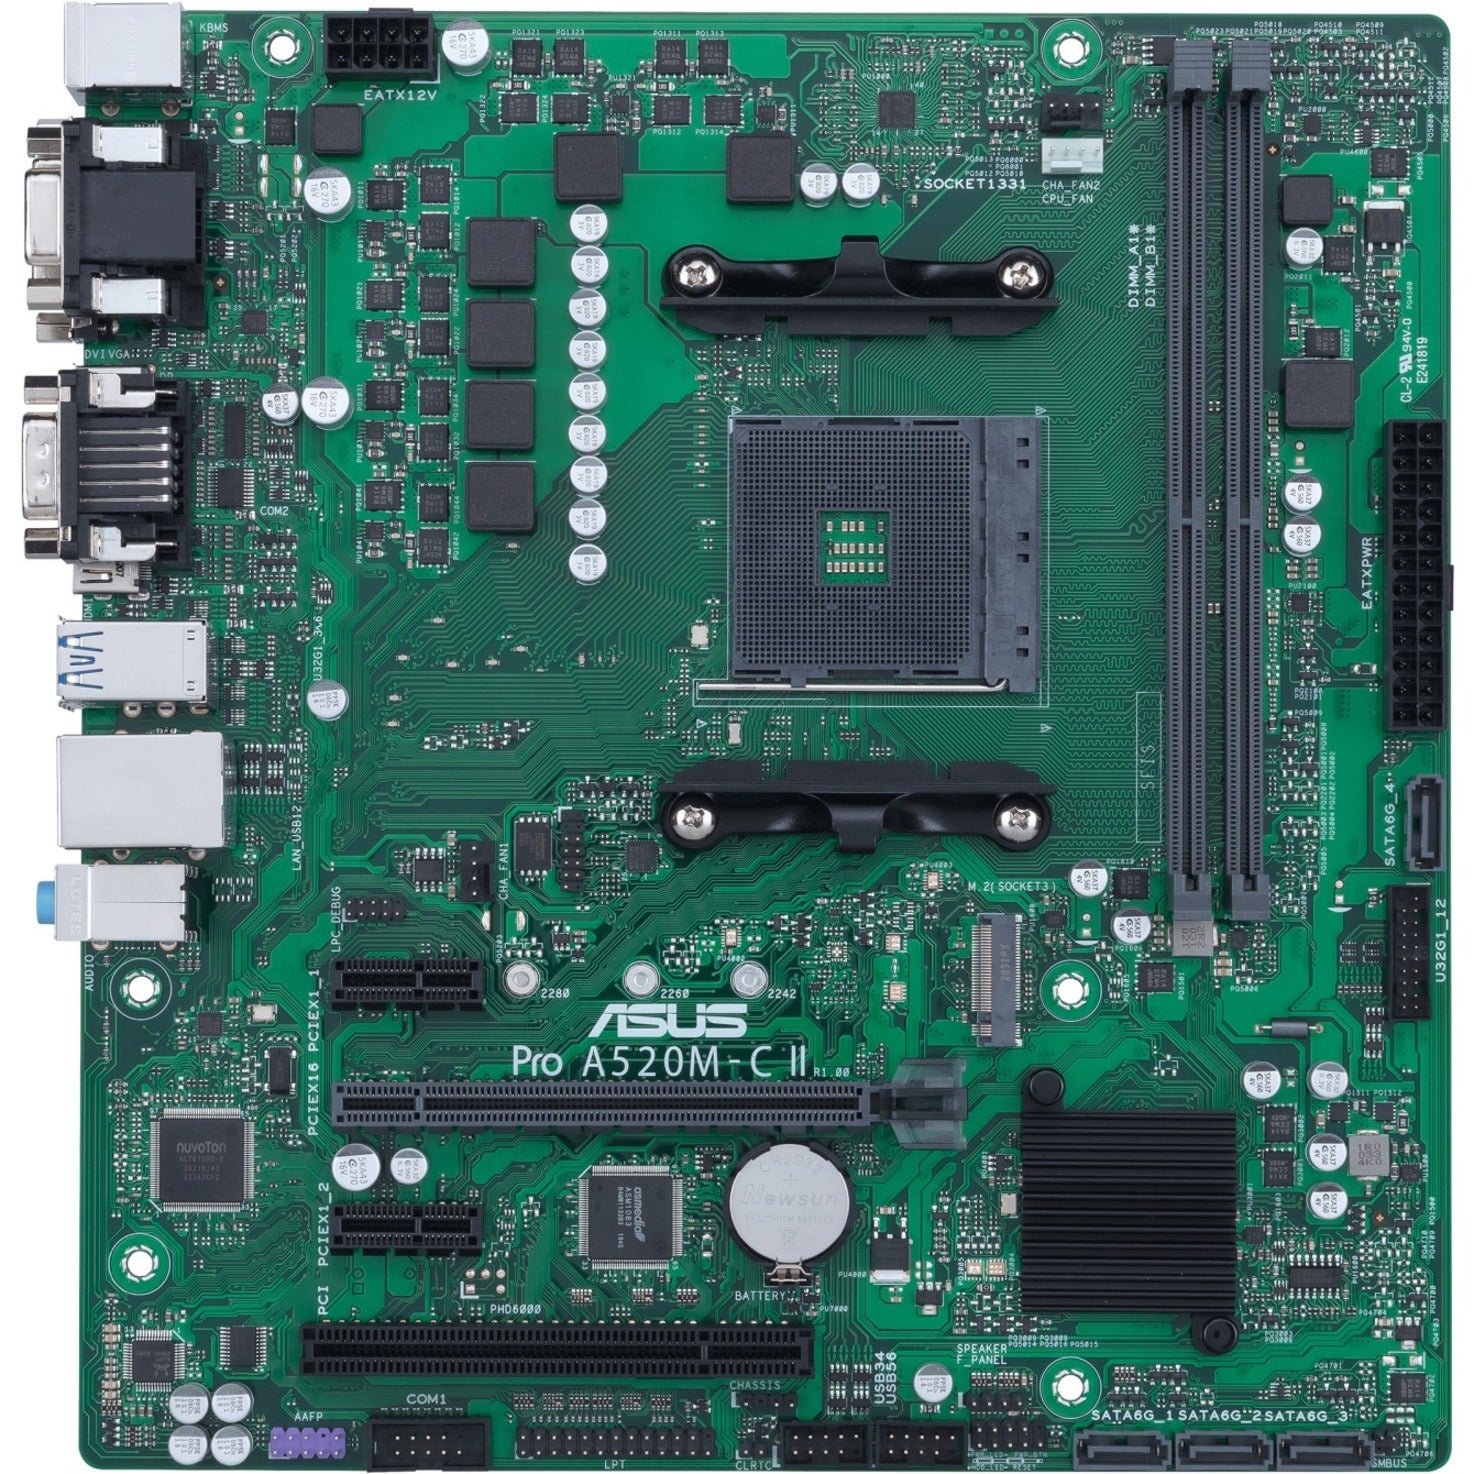 ASUS Desktop Motherboard PRO A520M-C II/CSM, Powered by AMD 3rd Gen Ryzen Processors, Enhanced Longevity, Security, Reliability, and Manageability